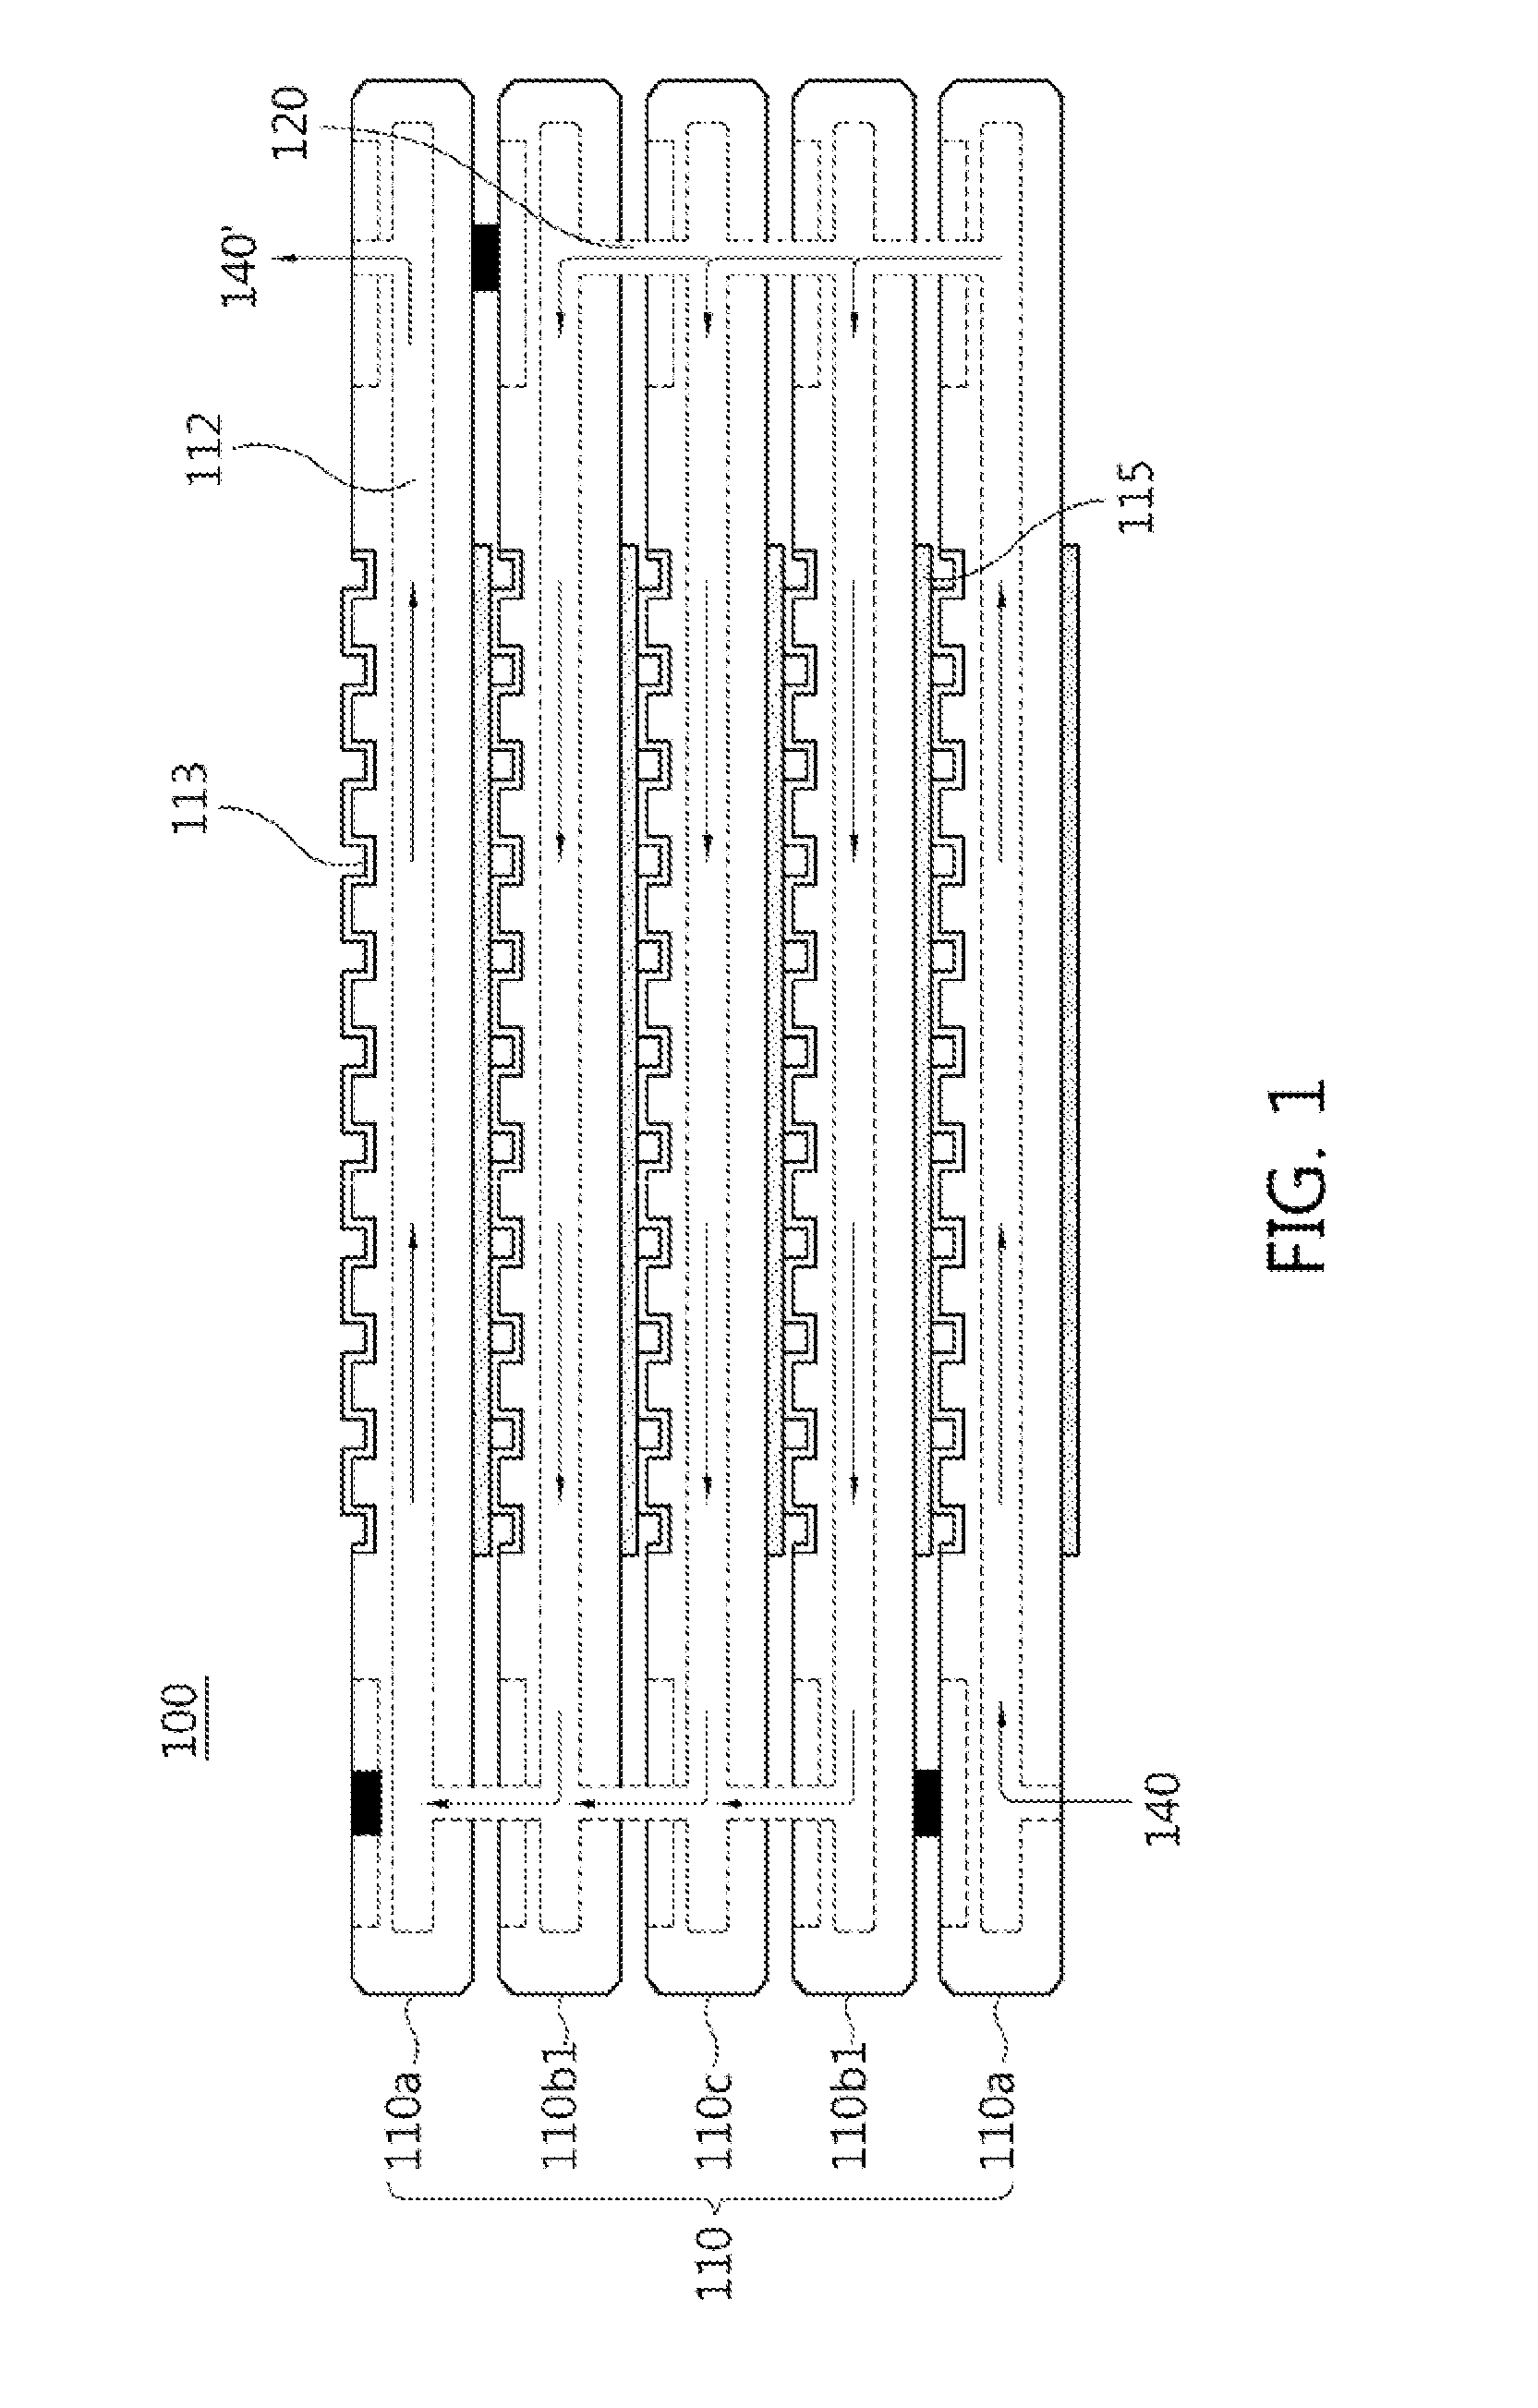 Flat-tubular solid oxide cell stack